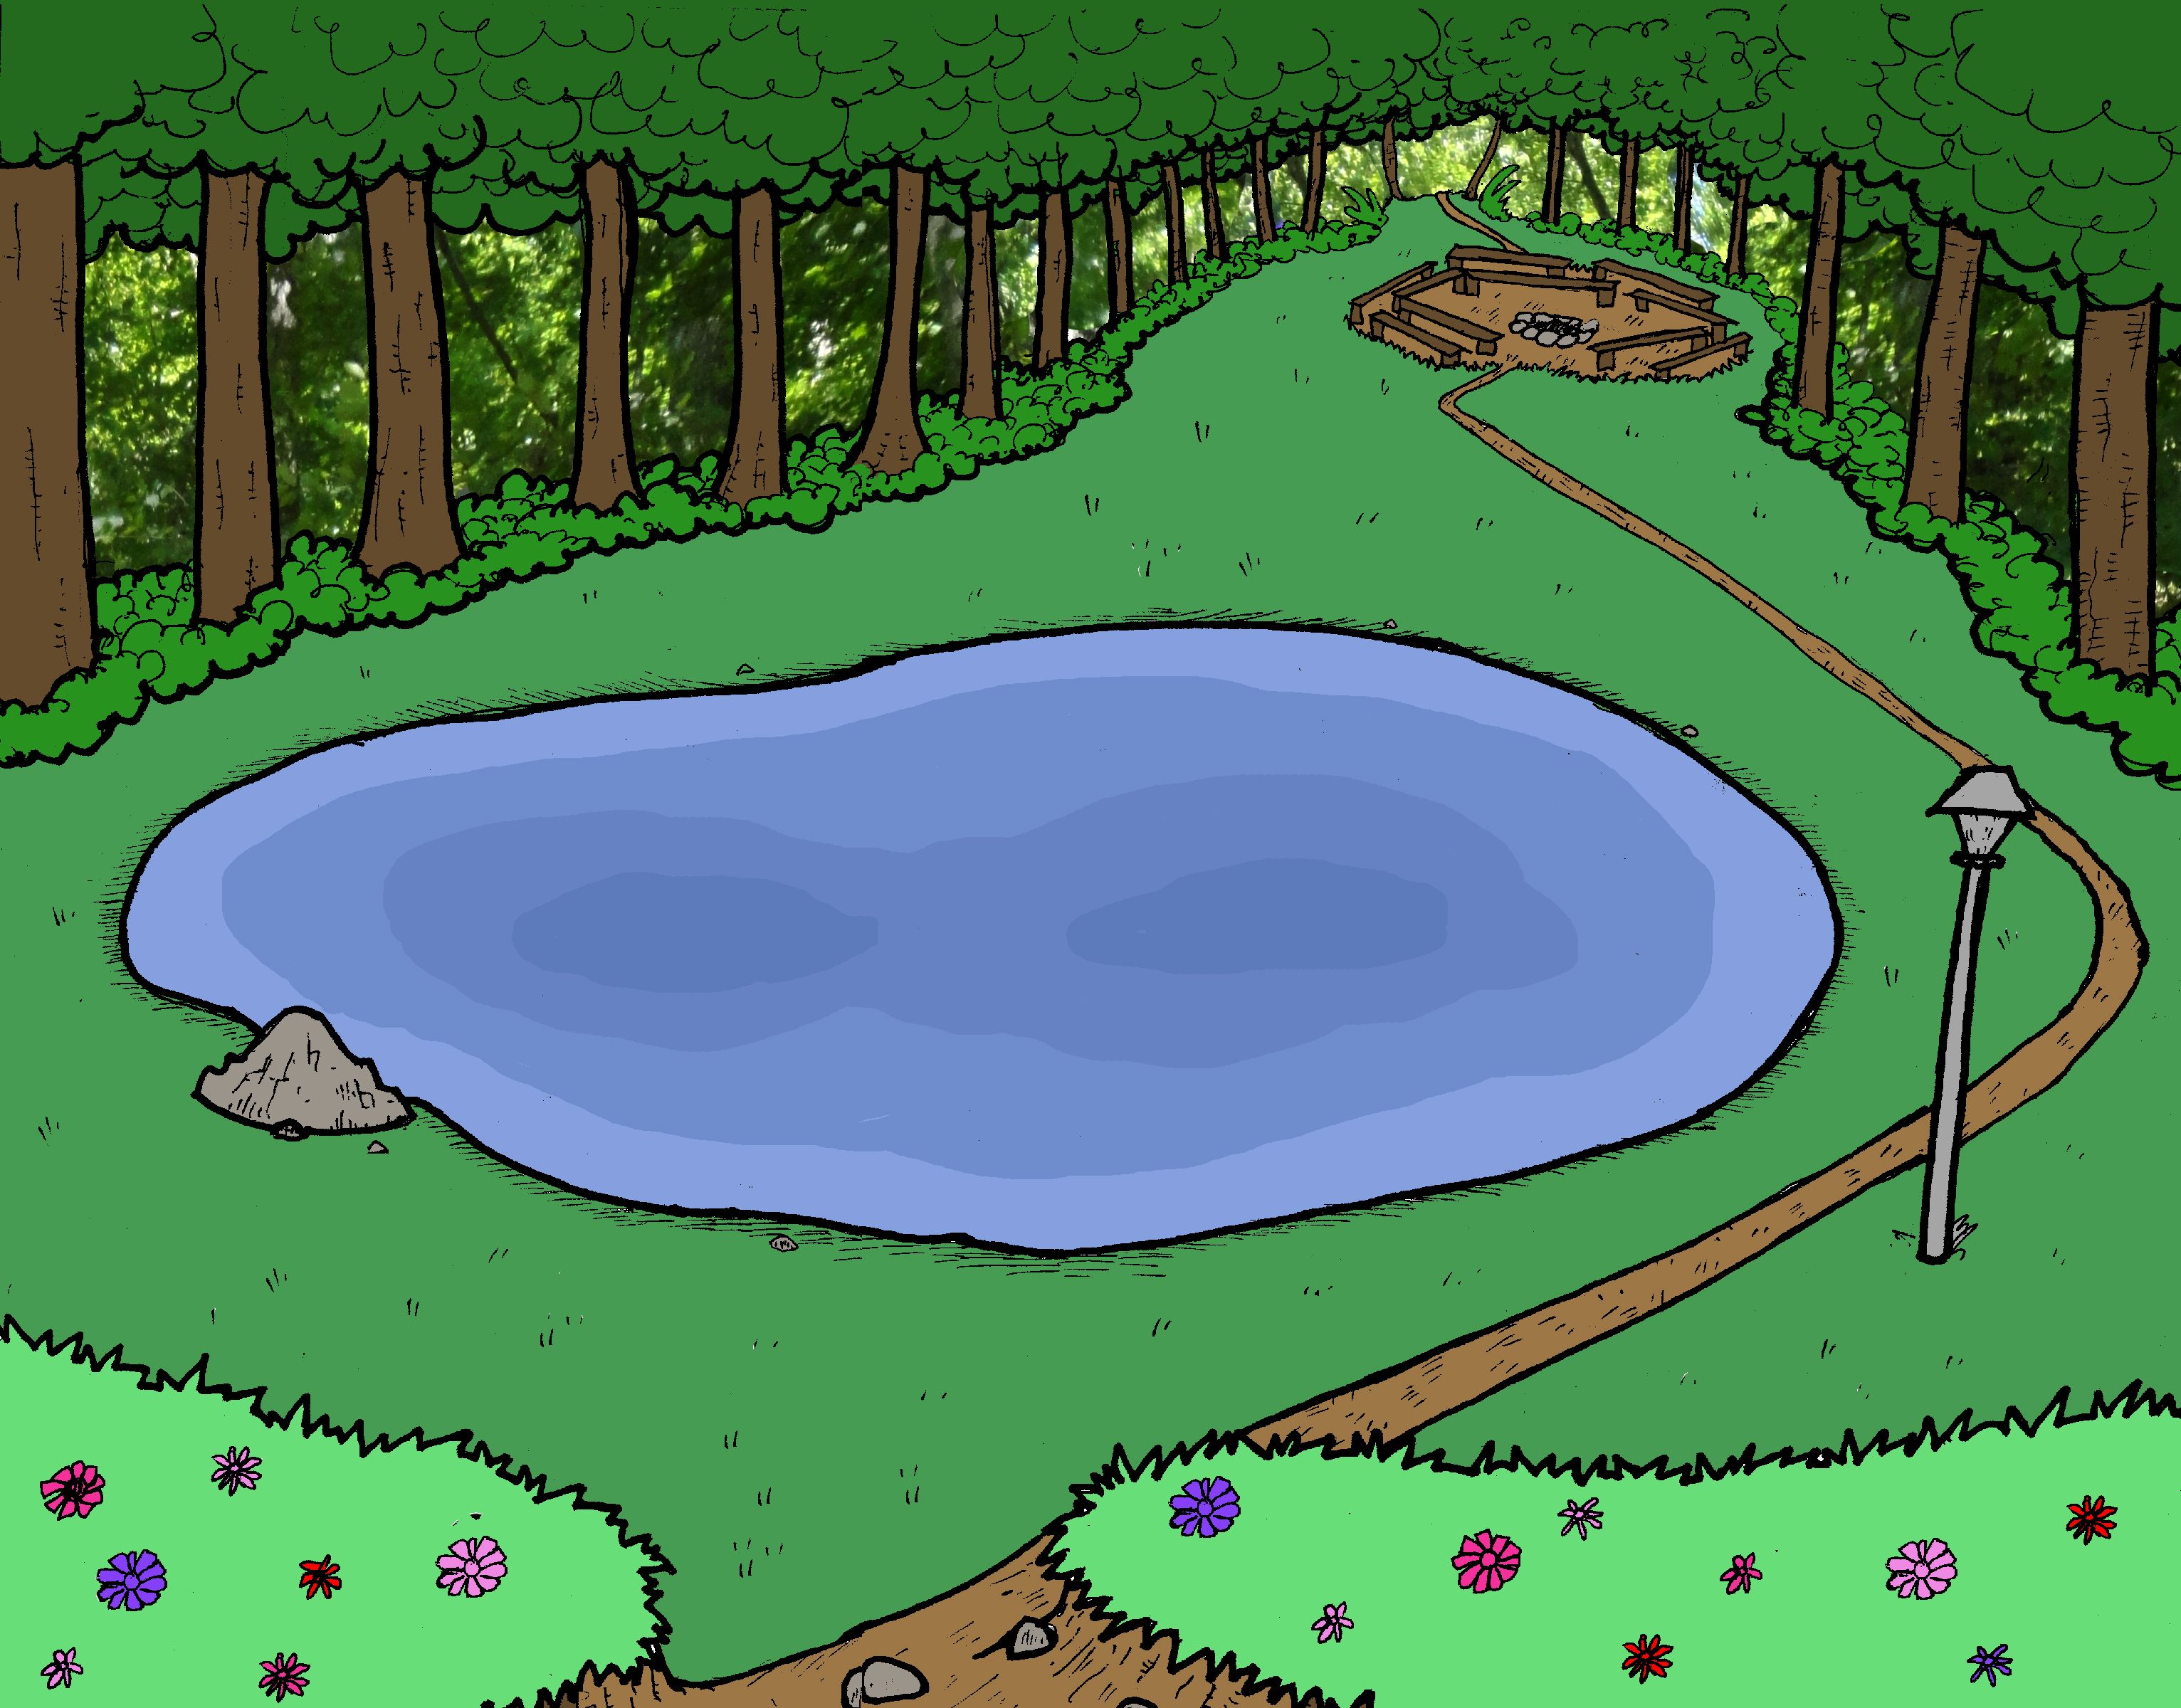 A drawing of the Shiloh Pond